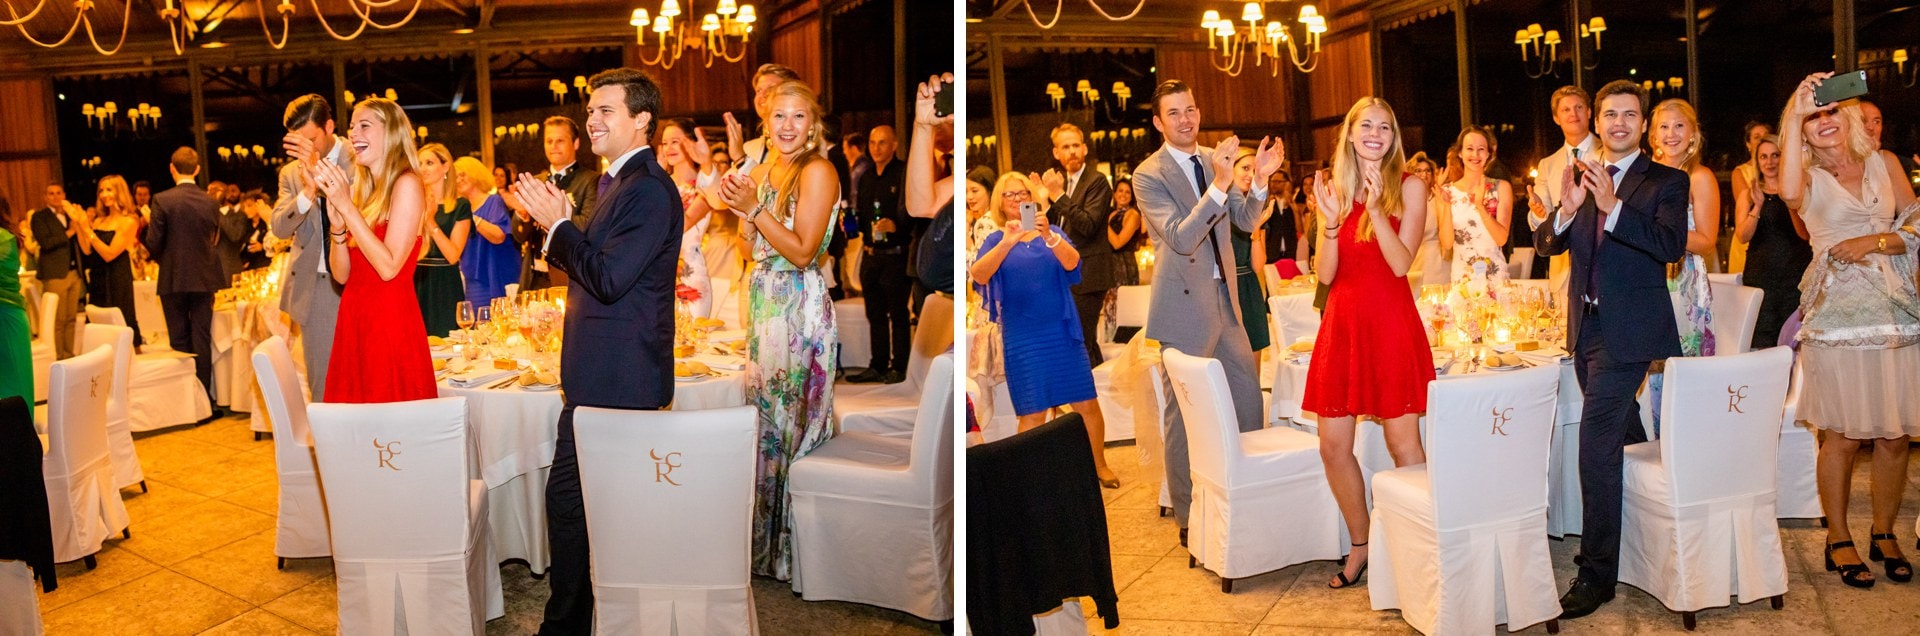 guests clapping the couple in